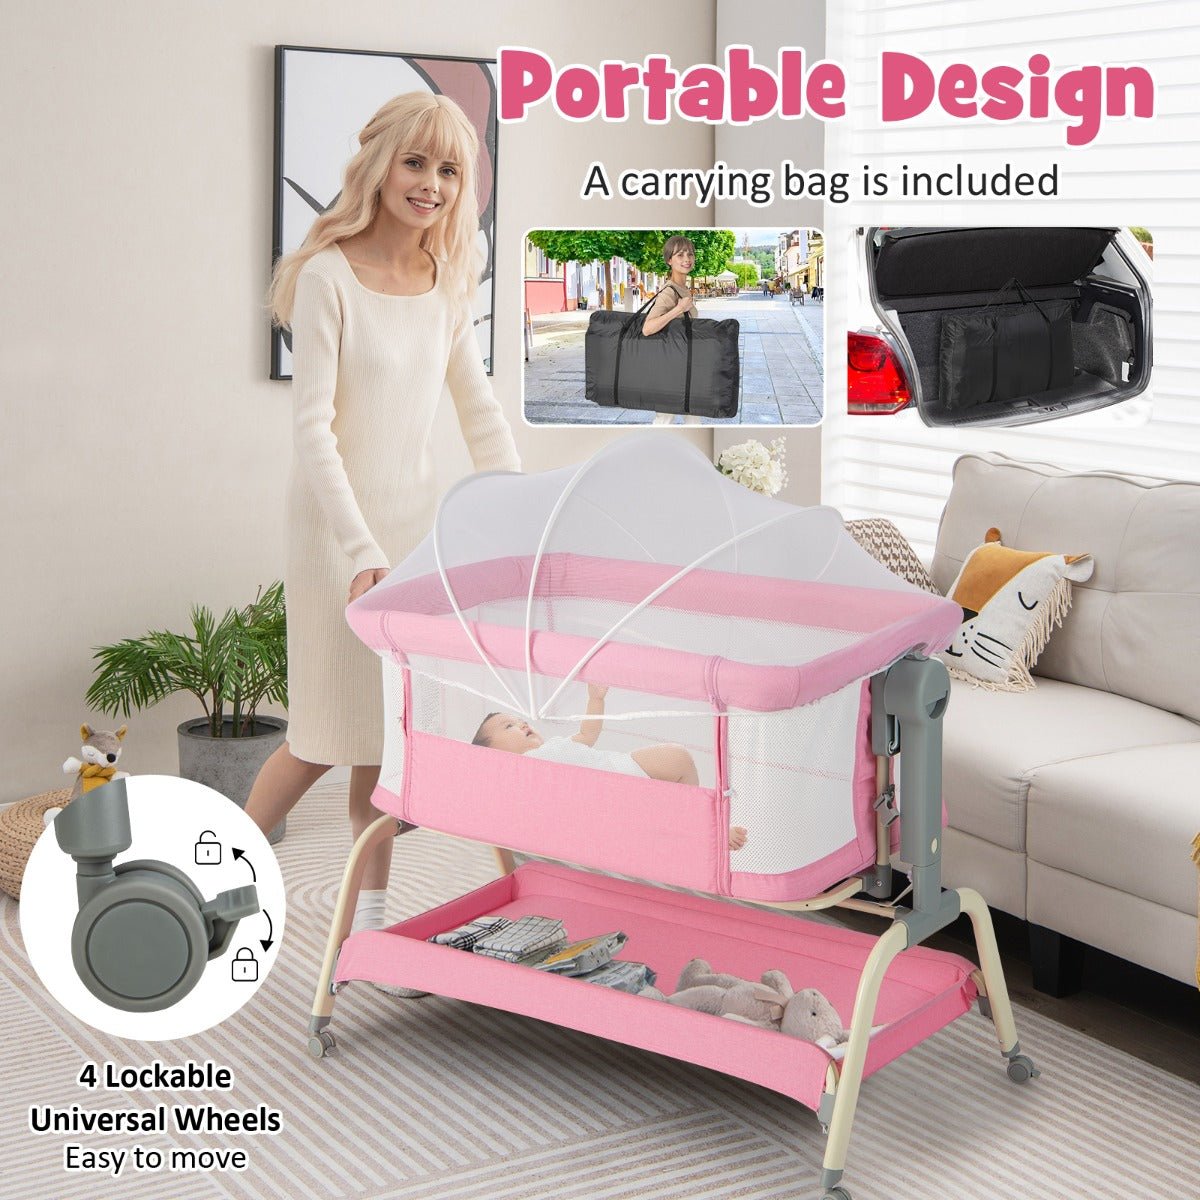 Enhance Your Baby's Sleep with the Pink 3-in-1 Travel Cot - Buy Now!